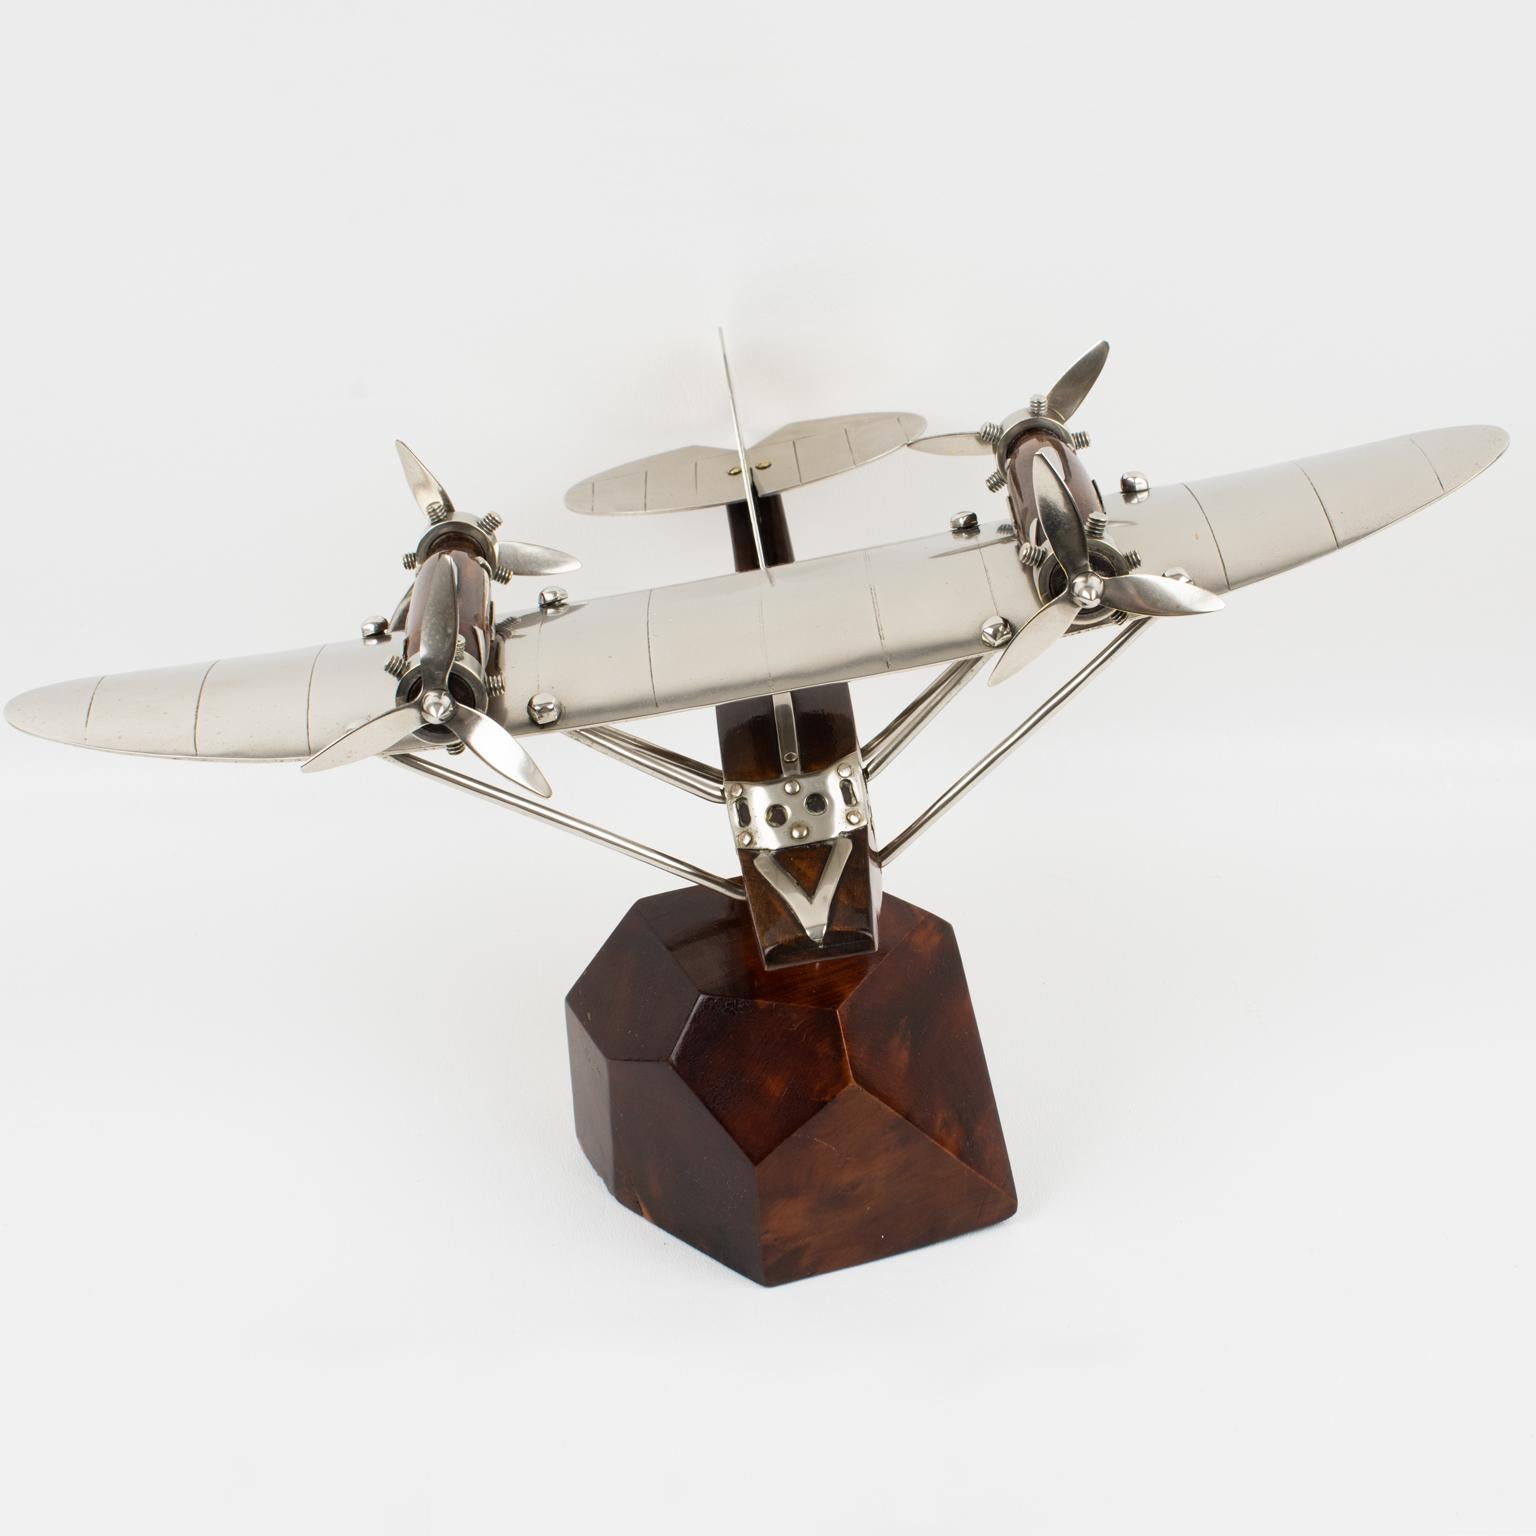 Metal Art Deco Wood and Chrome Airplane SeaPlane Aviation Model, France 1940s For Sale